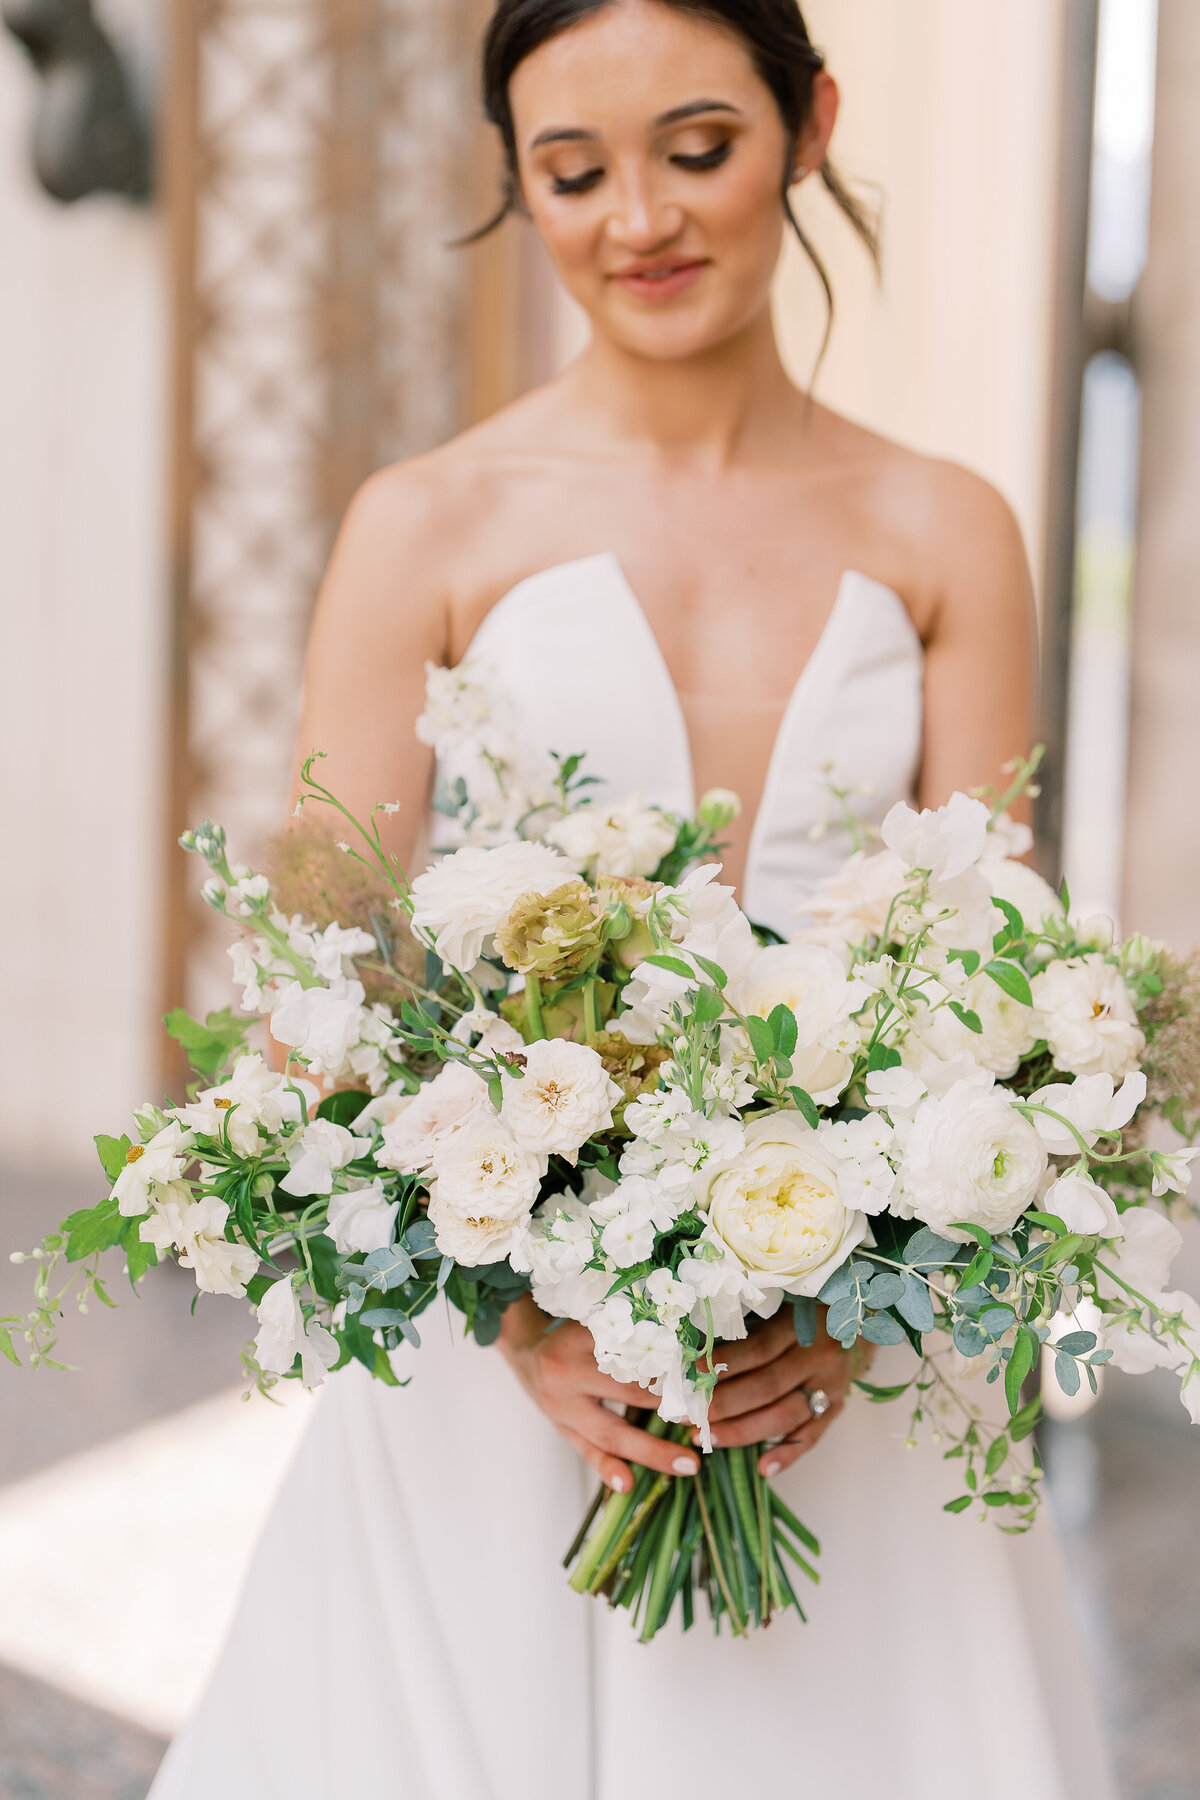 Whimsical bridal bouquet in cream, white, taupe, and champagne colors. This summer wedding bouquet is full of fun texture and represents elegant and timeless floral design. Composed of roses, lisianthus, smoke bush, ranunculus, and natural greenery. White and green floral wedding in downtown Nashville. Design by Rosemary & Finch Floral Design in Nashville, TN.